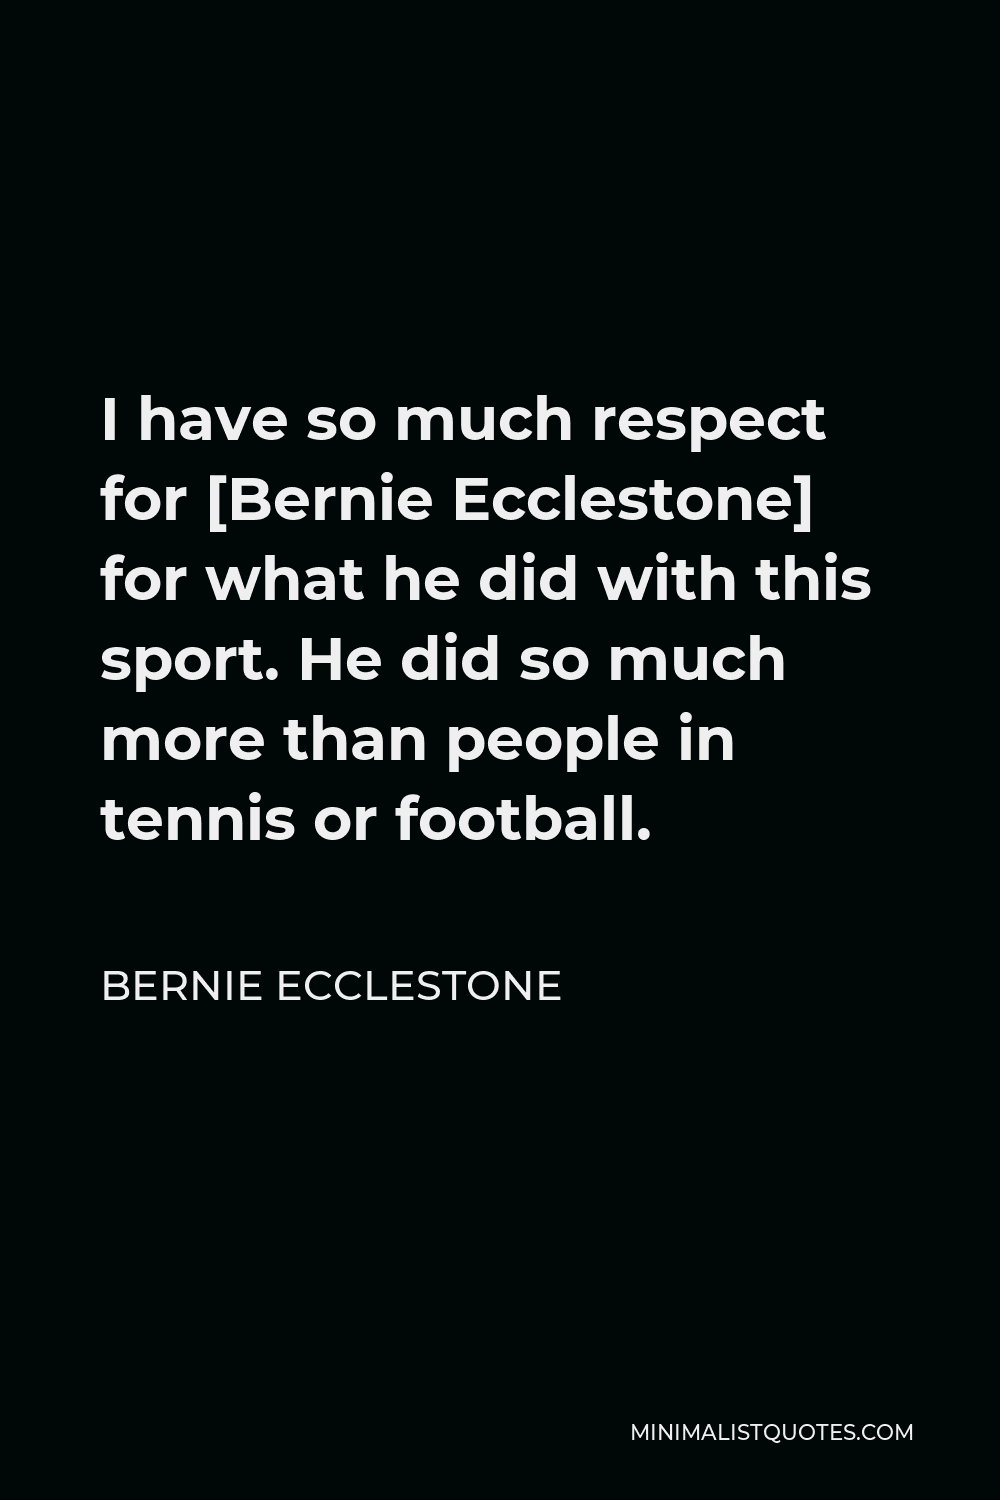 Bernie Ecclestone Quote - I have so much respect for [Bernie Ecclestone] for what he did with this sport. He did so much more than people in tennis or football.